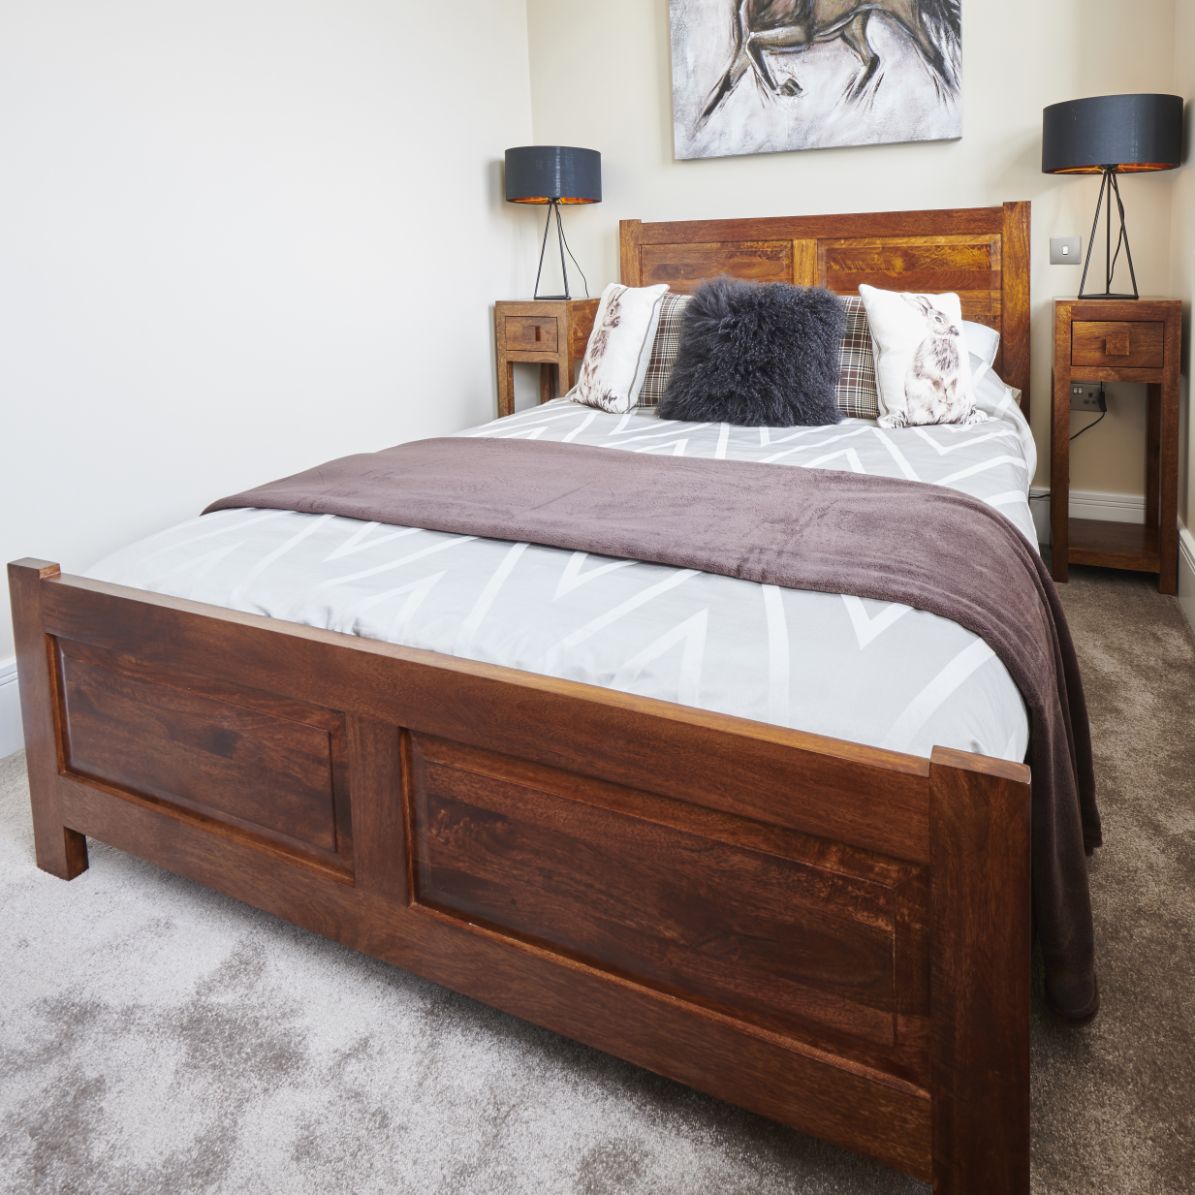 Wood Beds Single Double King Size, Solid Wood King Size Bed Frame